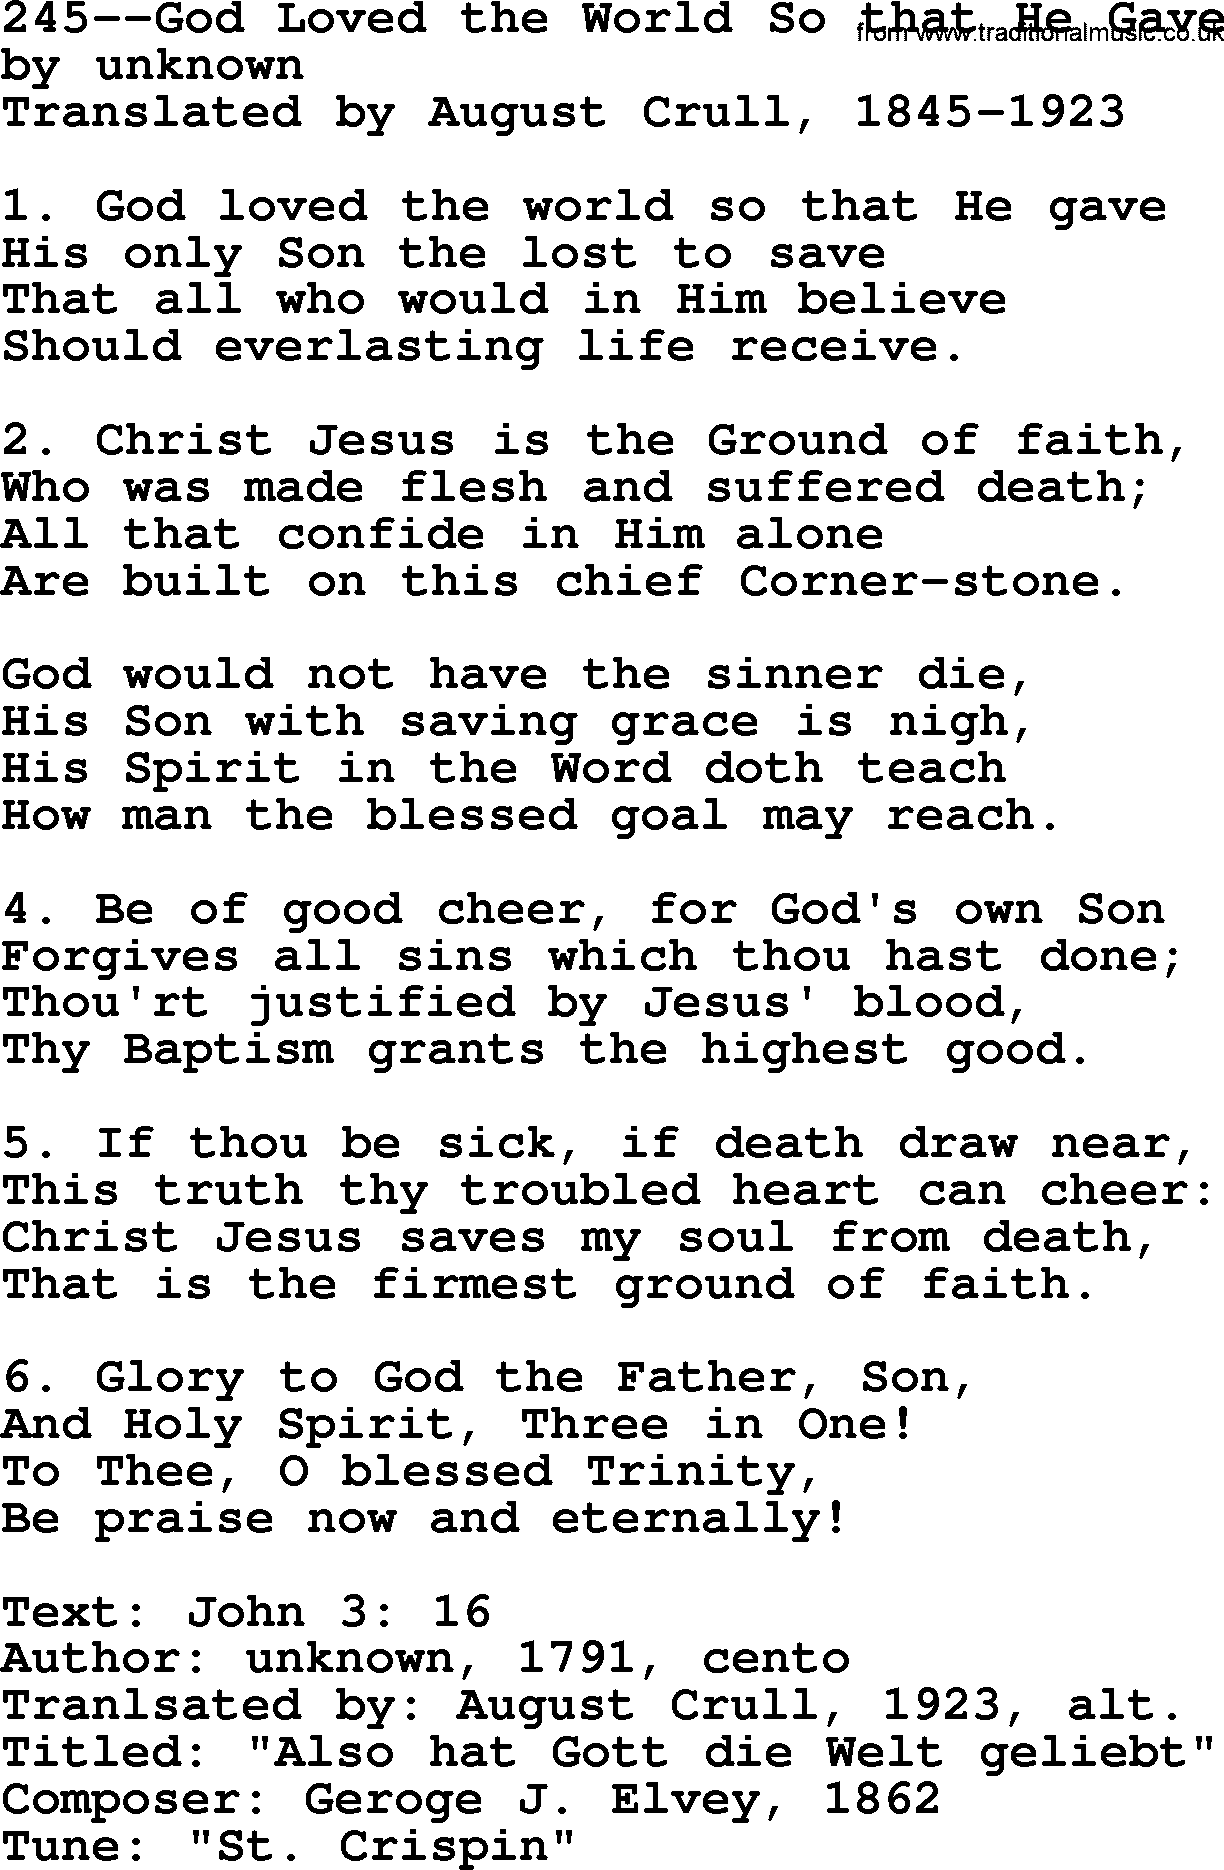 Lutheran Hymn: 245--God Loved the World So that He Gave.txt lyrics with PDF